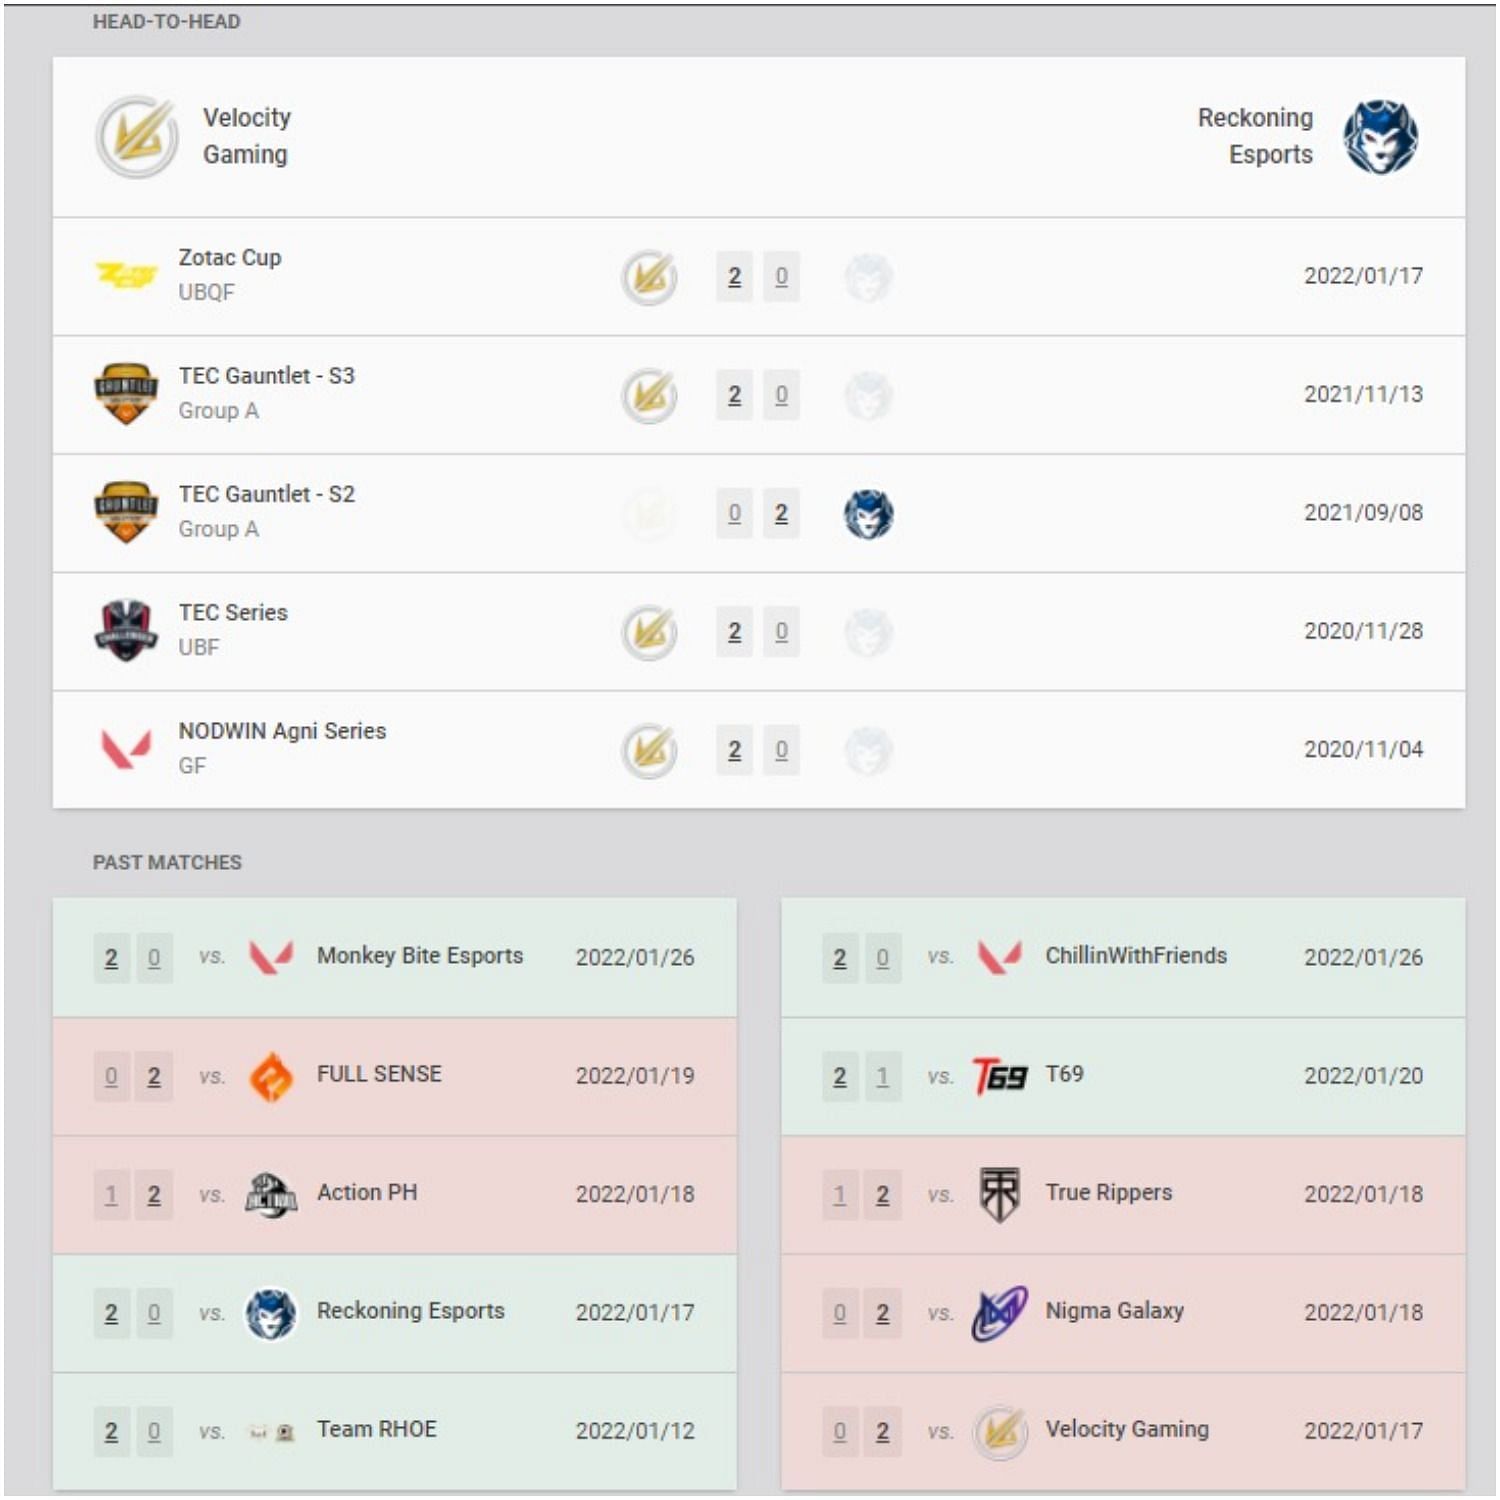 Velocity Gaming and Reckoning Esports recent results and head-to-head (Image via VLR.gg)